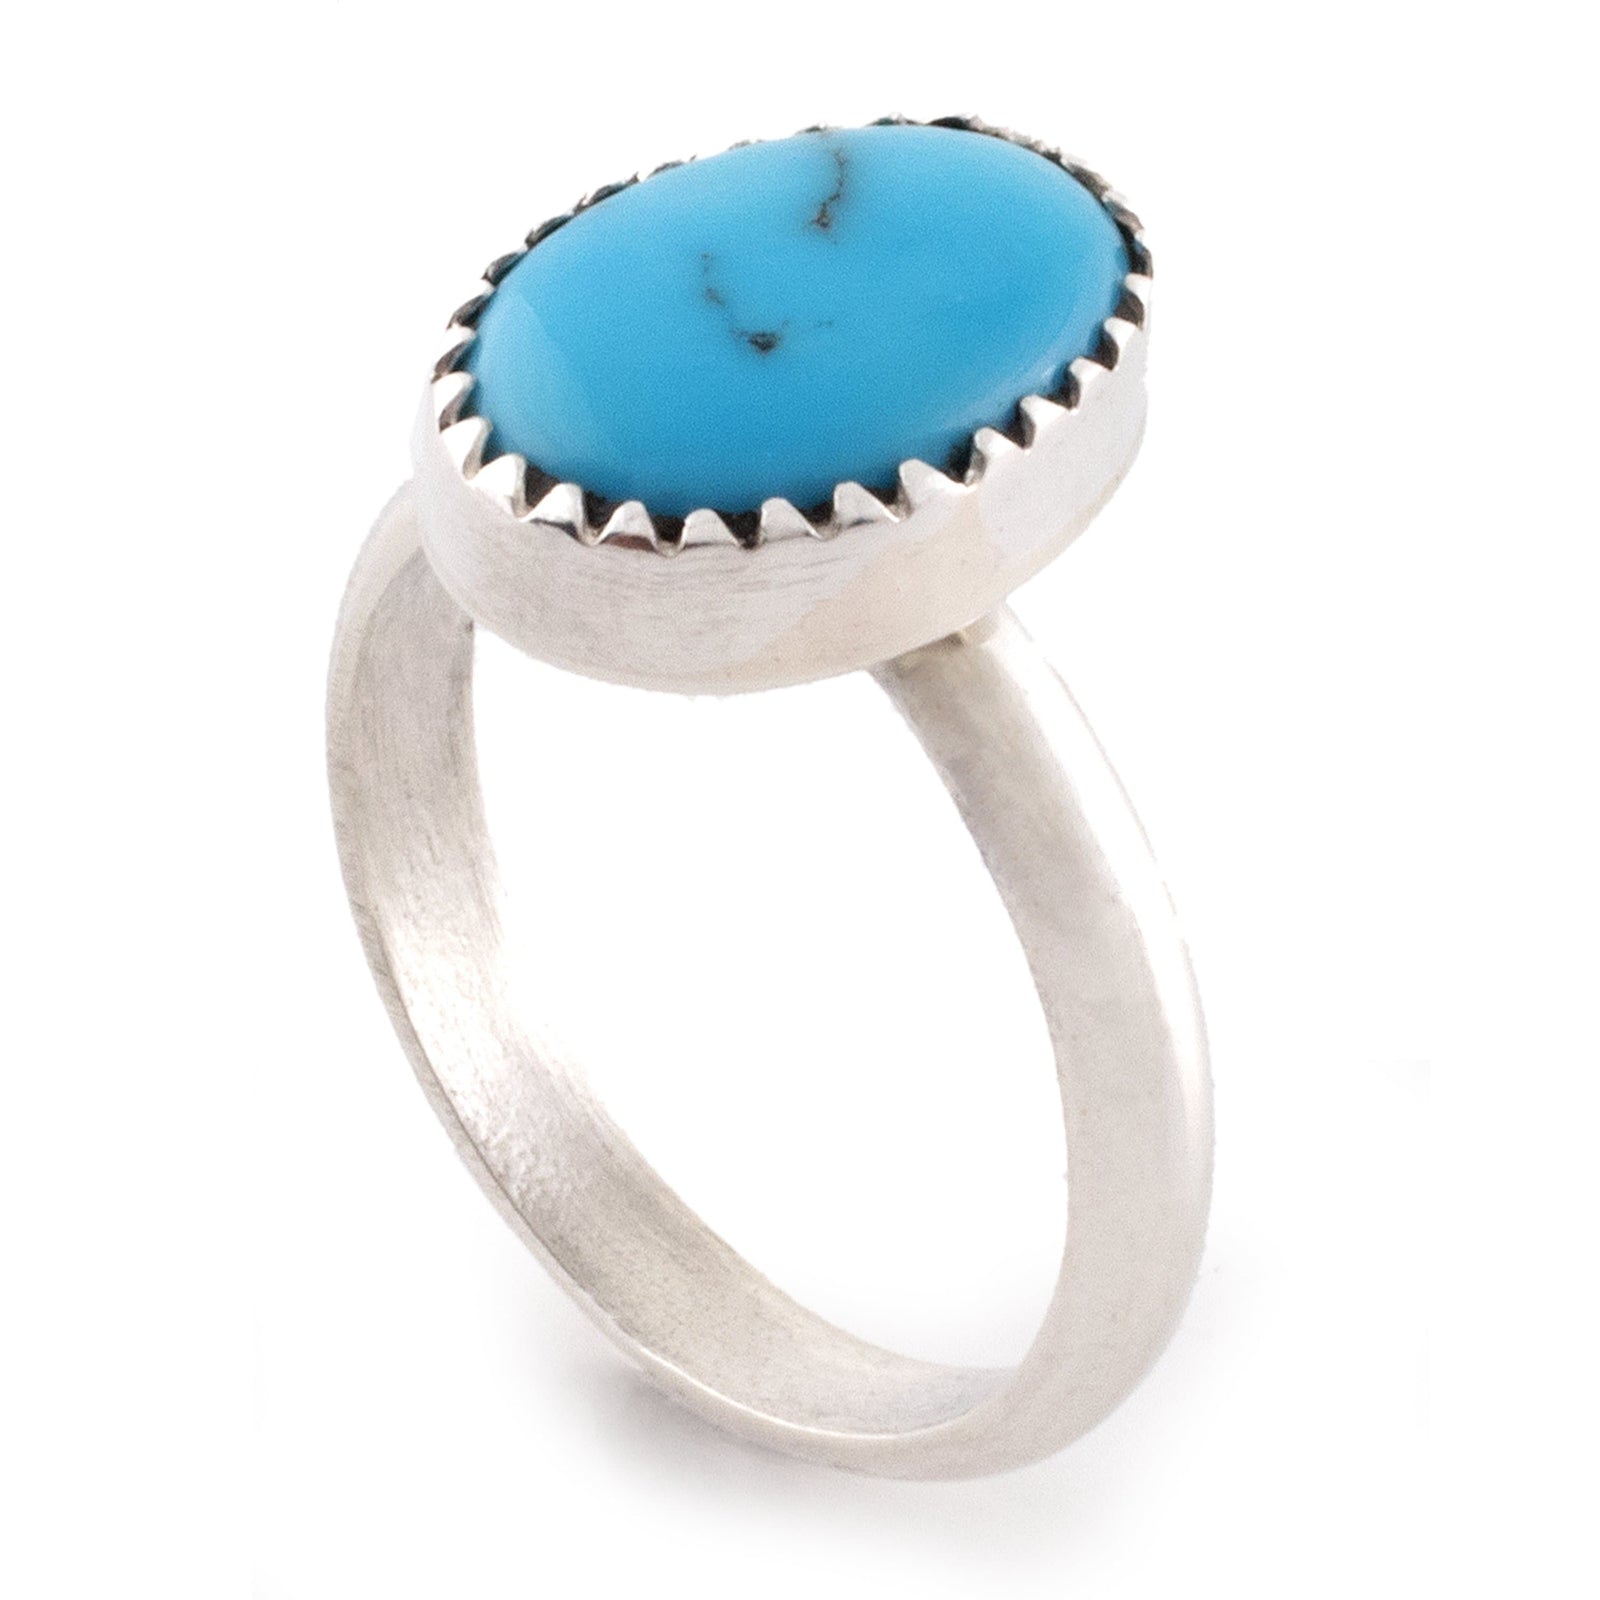 Kalifano Southwest Silver Jewelry Sleeping Beauty Turquoise 925 Sterling Silver Ring USA Handmade